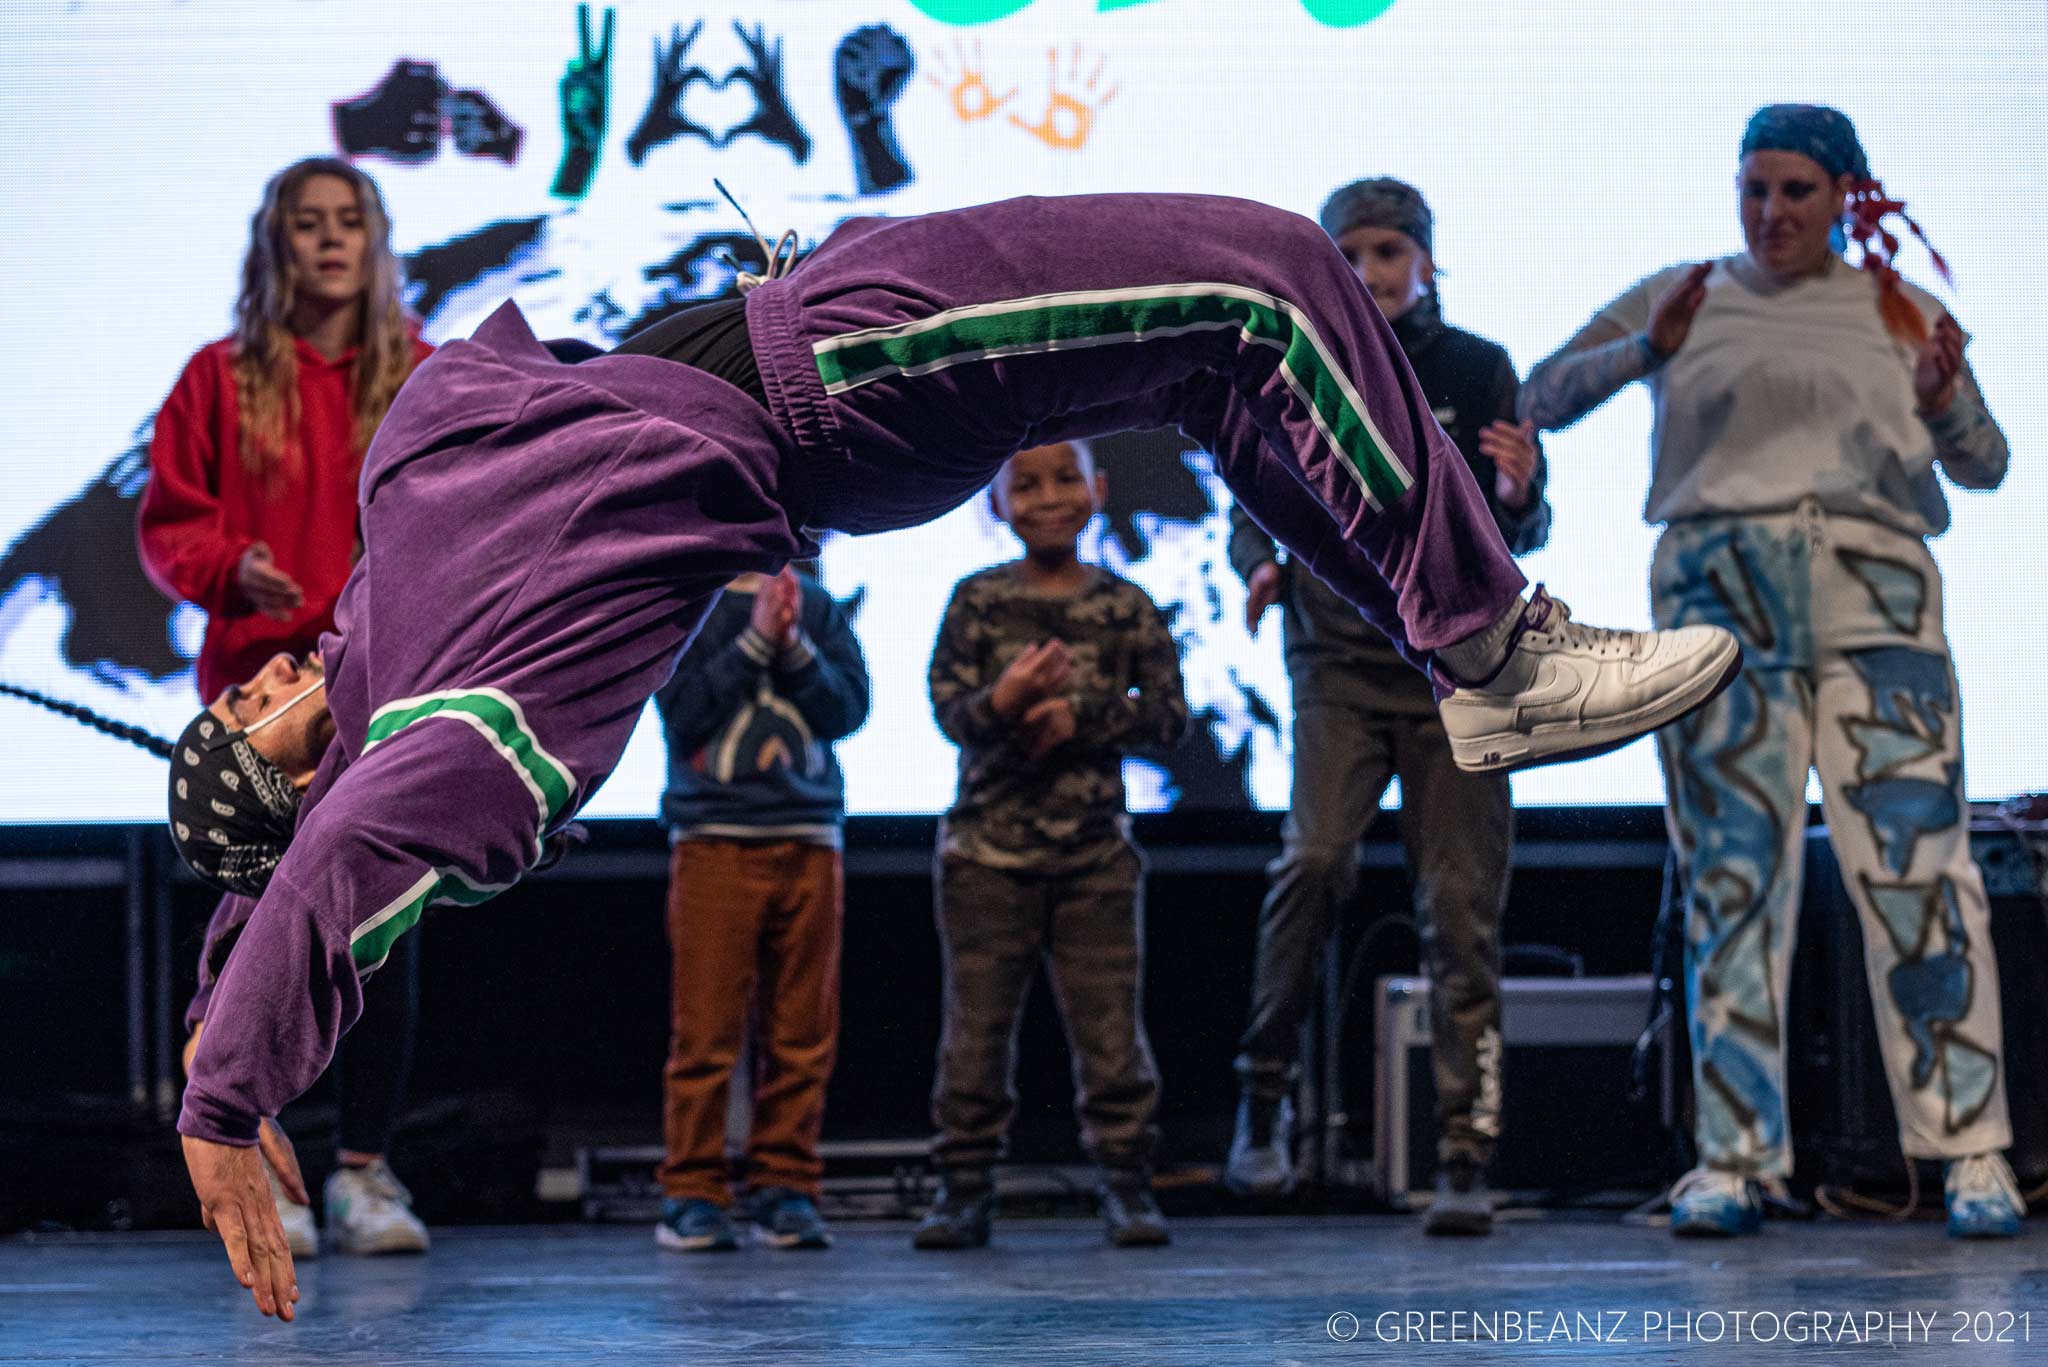 Toby Gorniak Breakdancer in air at Roots festival in Plymouth 2021